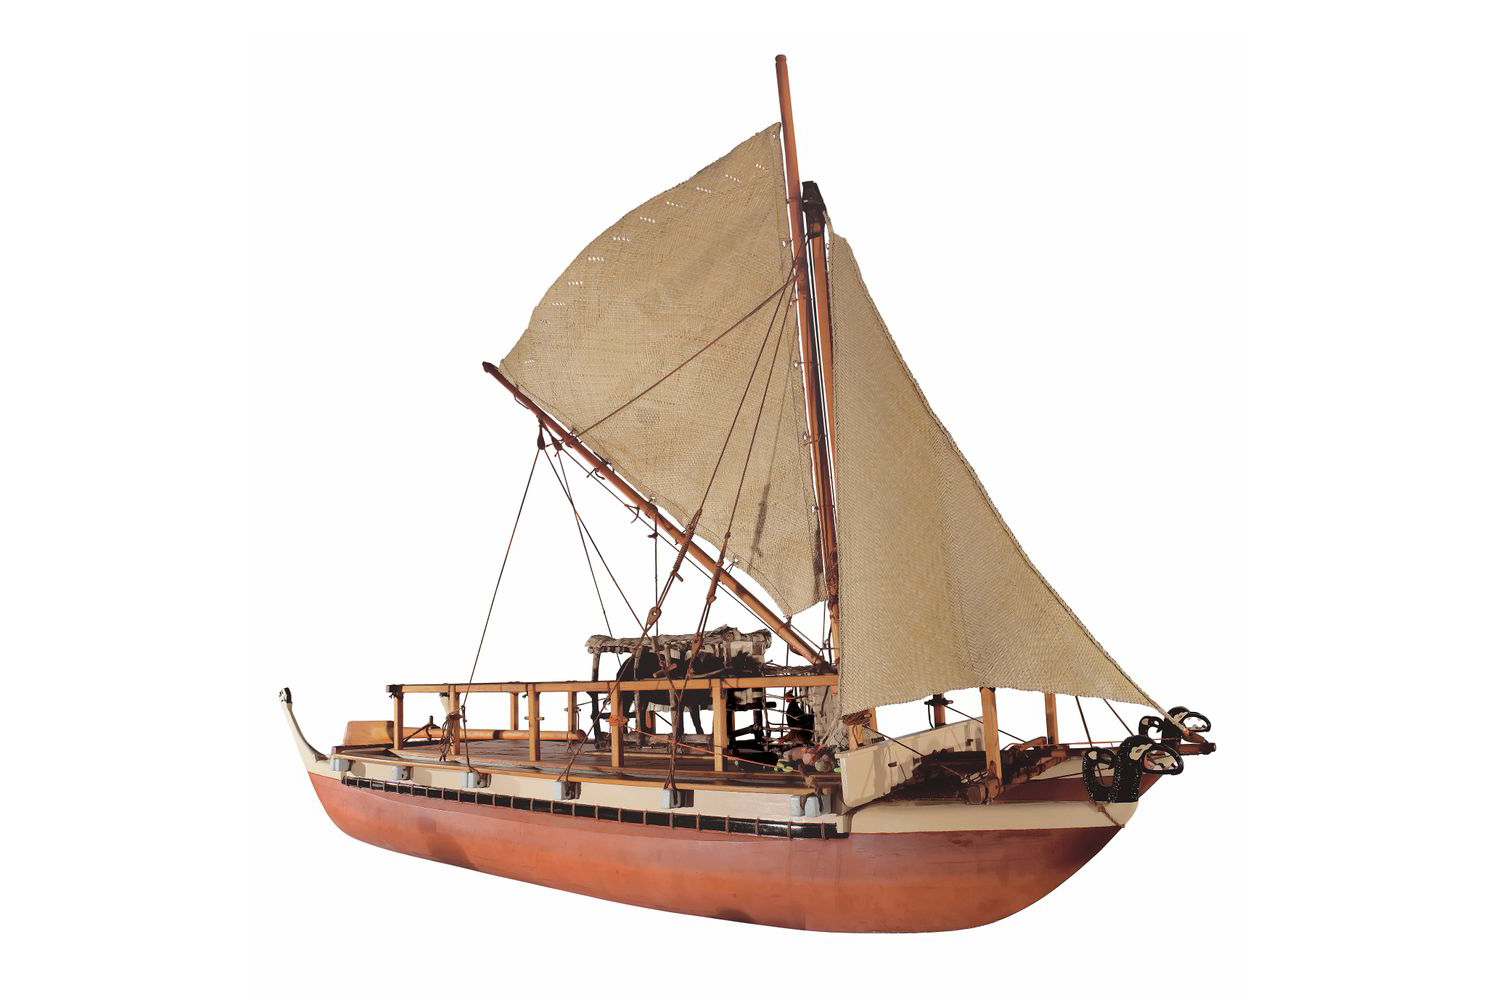 A model double-hulled canoe with a woven sail.